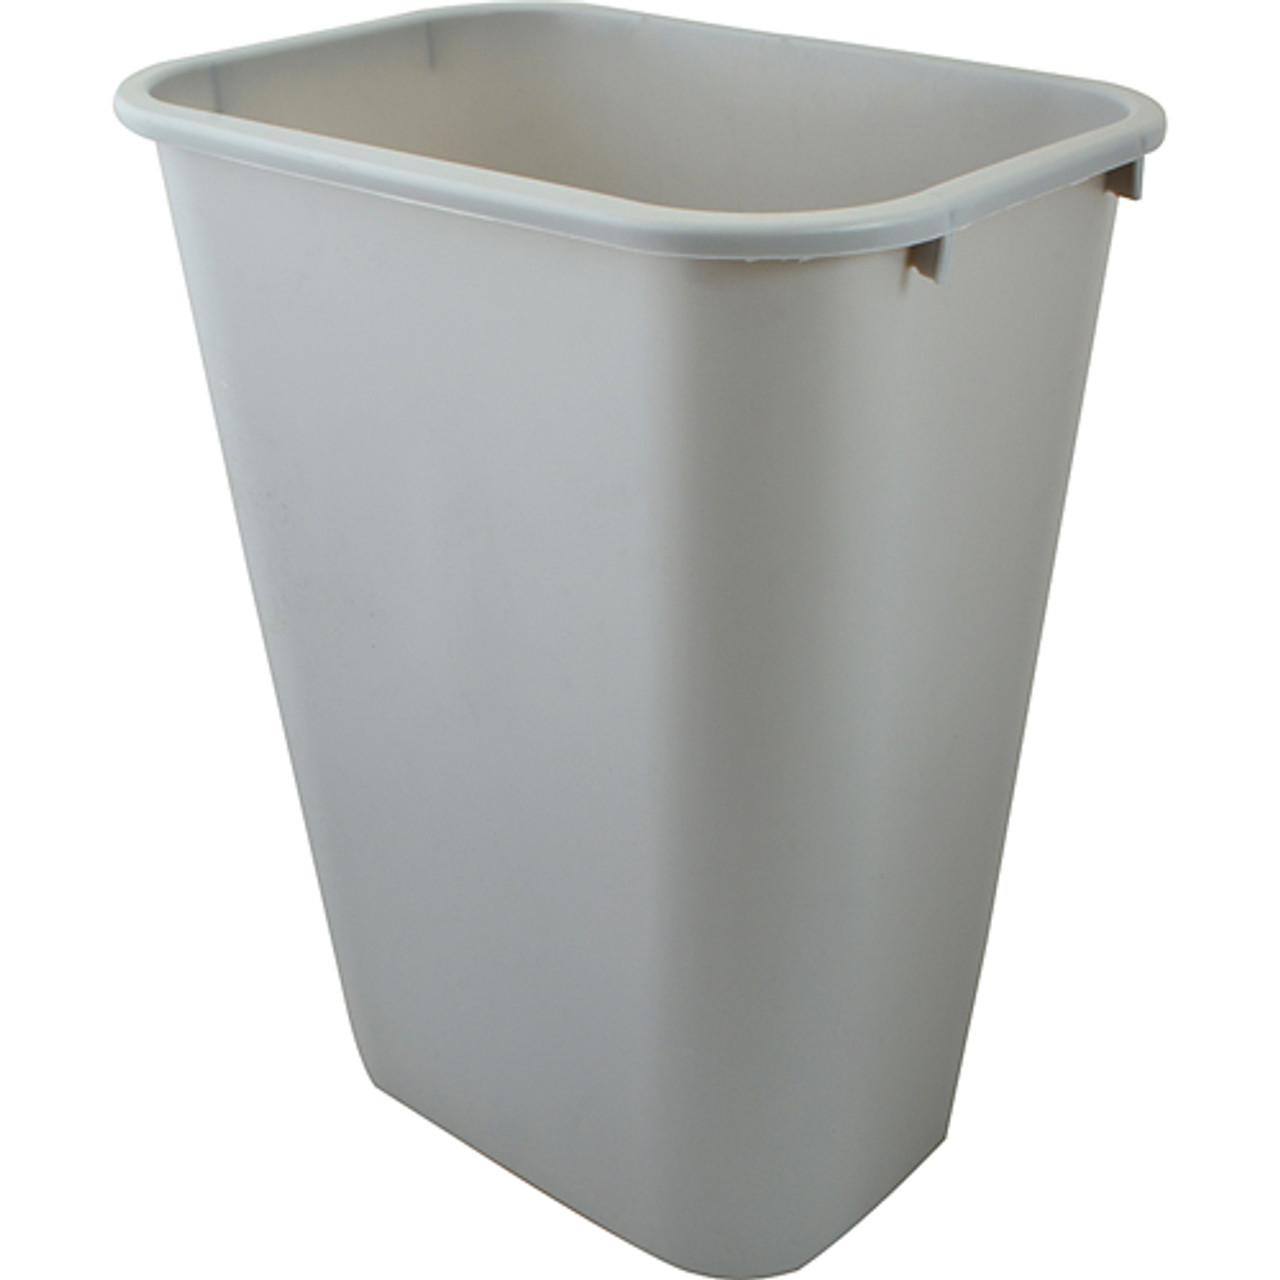 10 Gal Trash Can Gray - Replacement Part For Rubbermaid RBMDFG295700GRAY